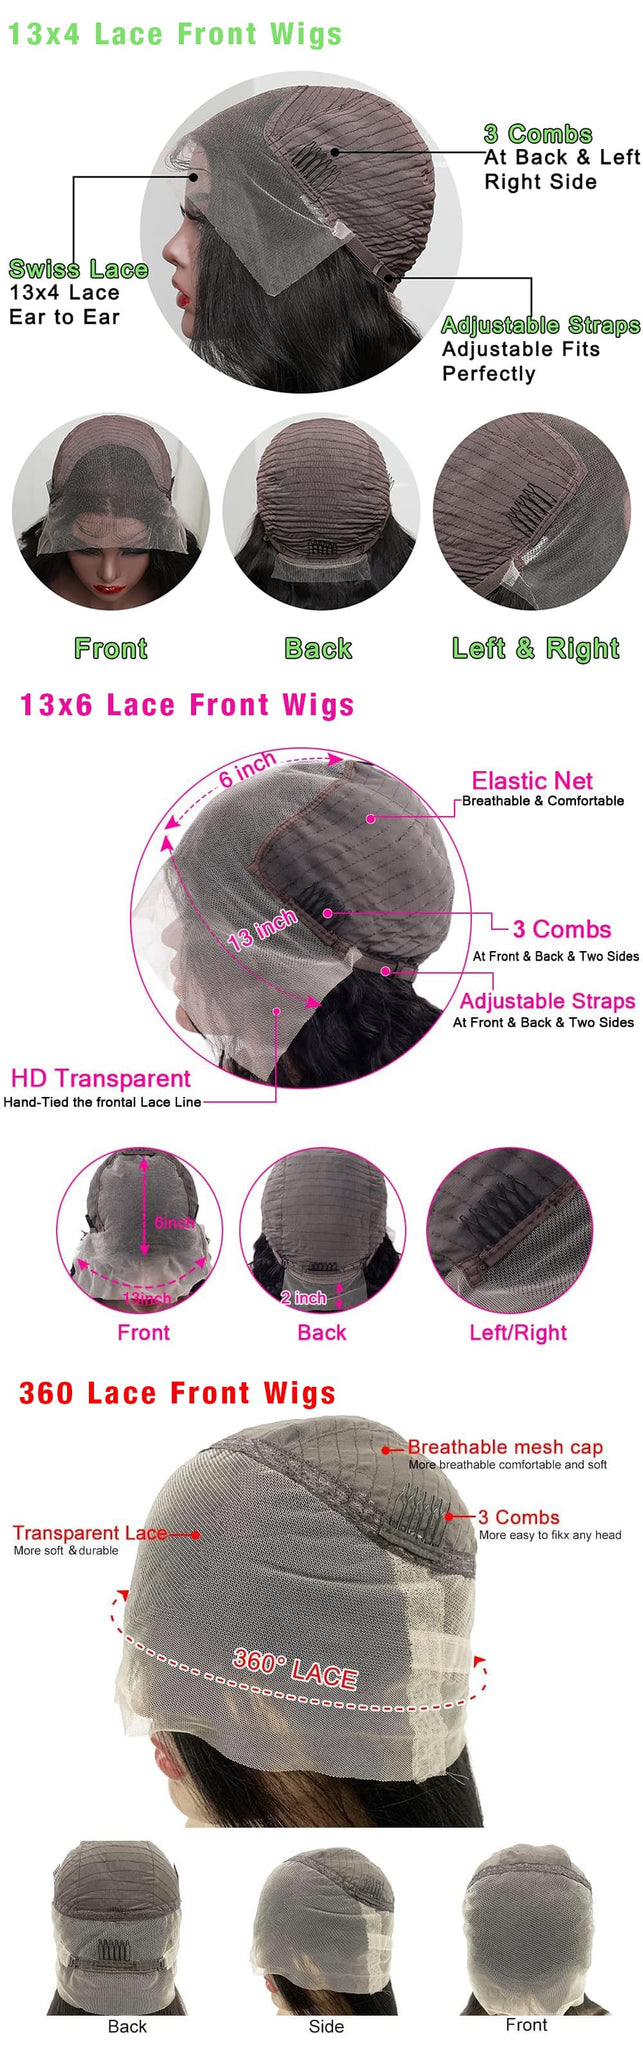 What is a Lace Front Wig